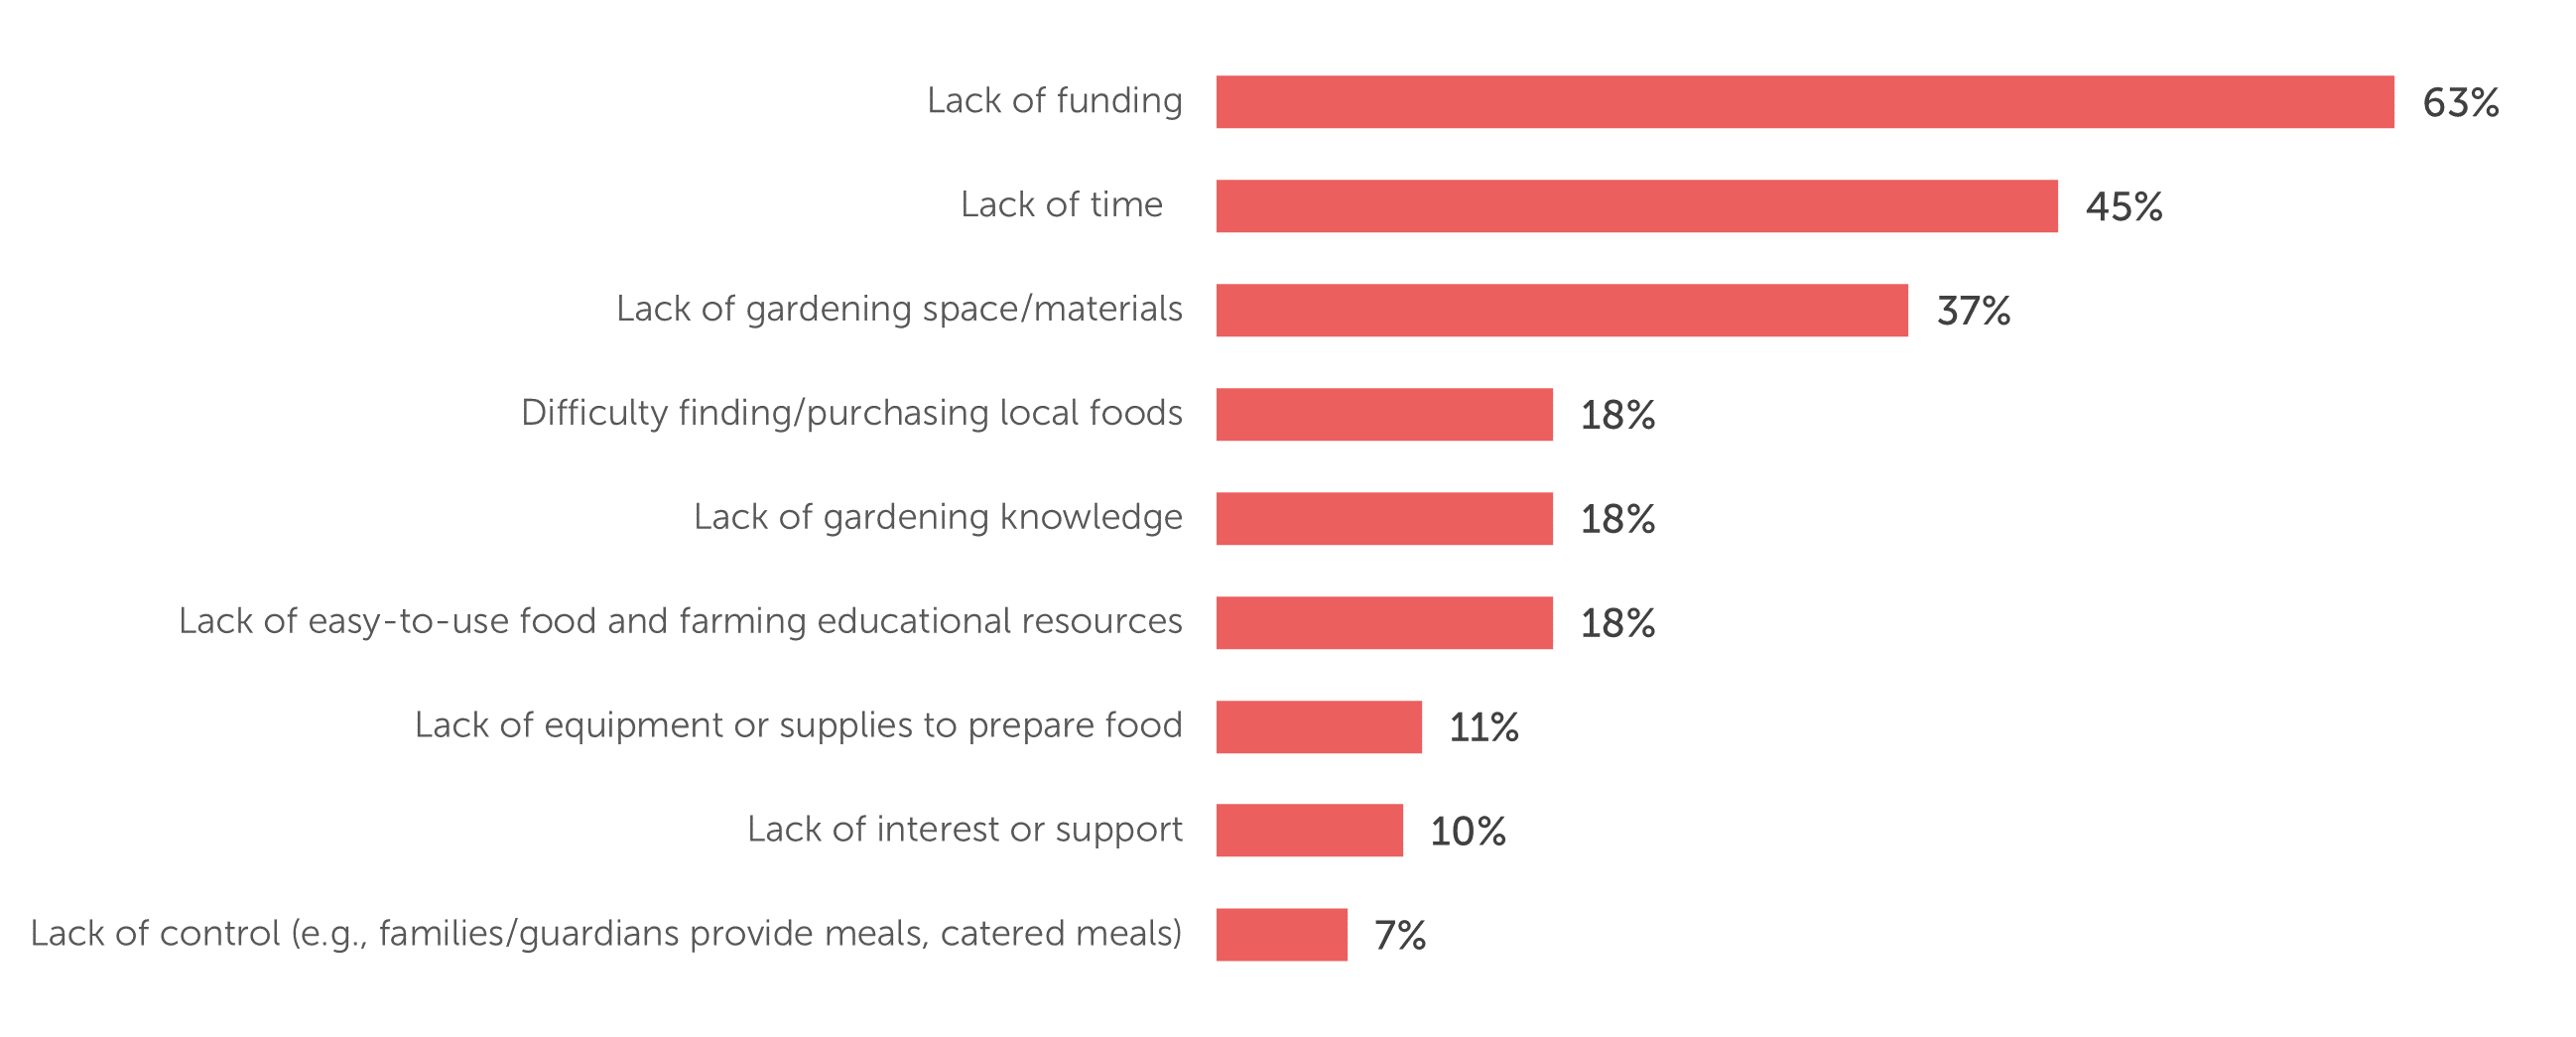 Lack of funding 170 (63%)  Lack of time 121 (45%)    Lack of gardening space/materials 101 (37%)    Difficulty finding/purchasing local foods 49 (18%)  Lack of gardening knowledge 50 (18%)  Lack of easy-to-use food and farming educational resources 48 (18%)  Lack of equipment or supplies to prepare food 30 (11%)  Lack of interest or support 26 (10%)    Lack of control (e.g., families/guardians provide meals, catered meals) 19 (7%)